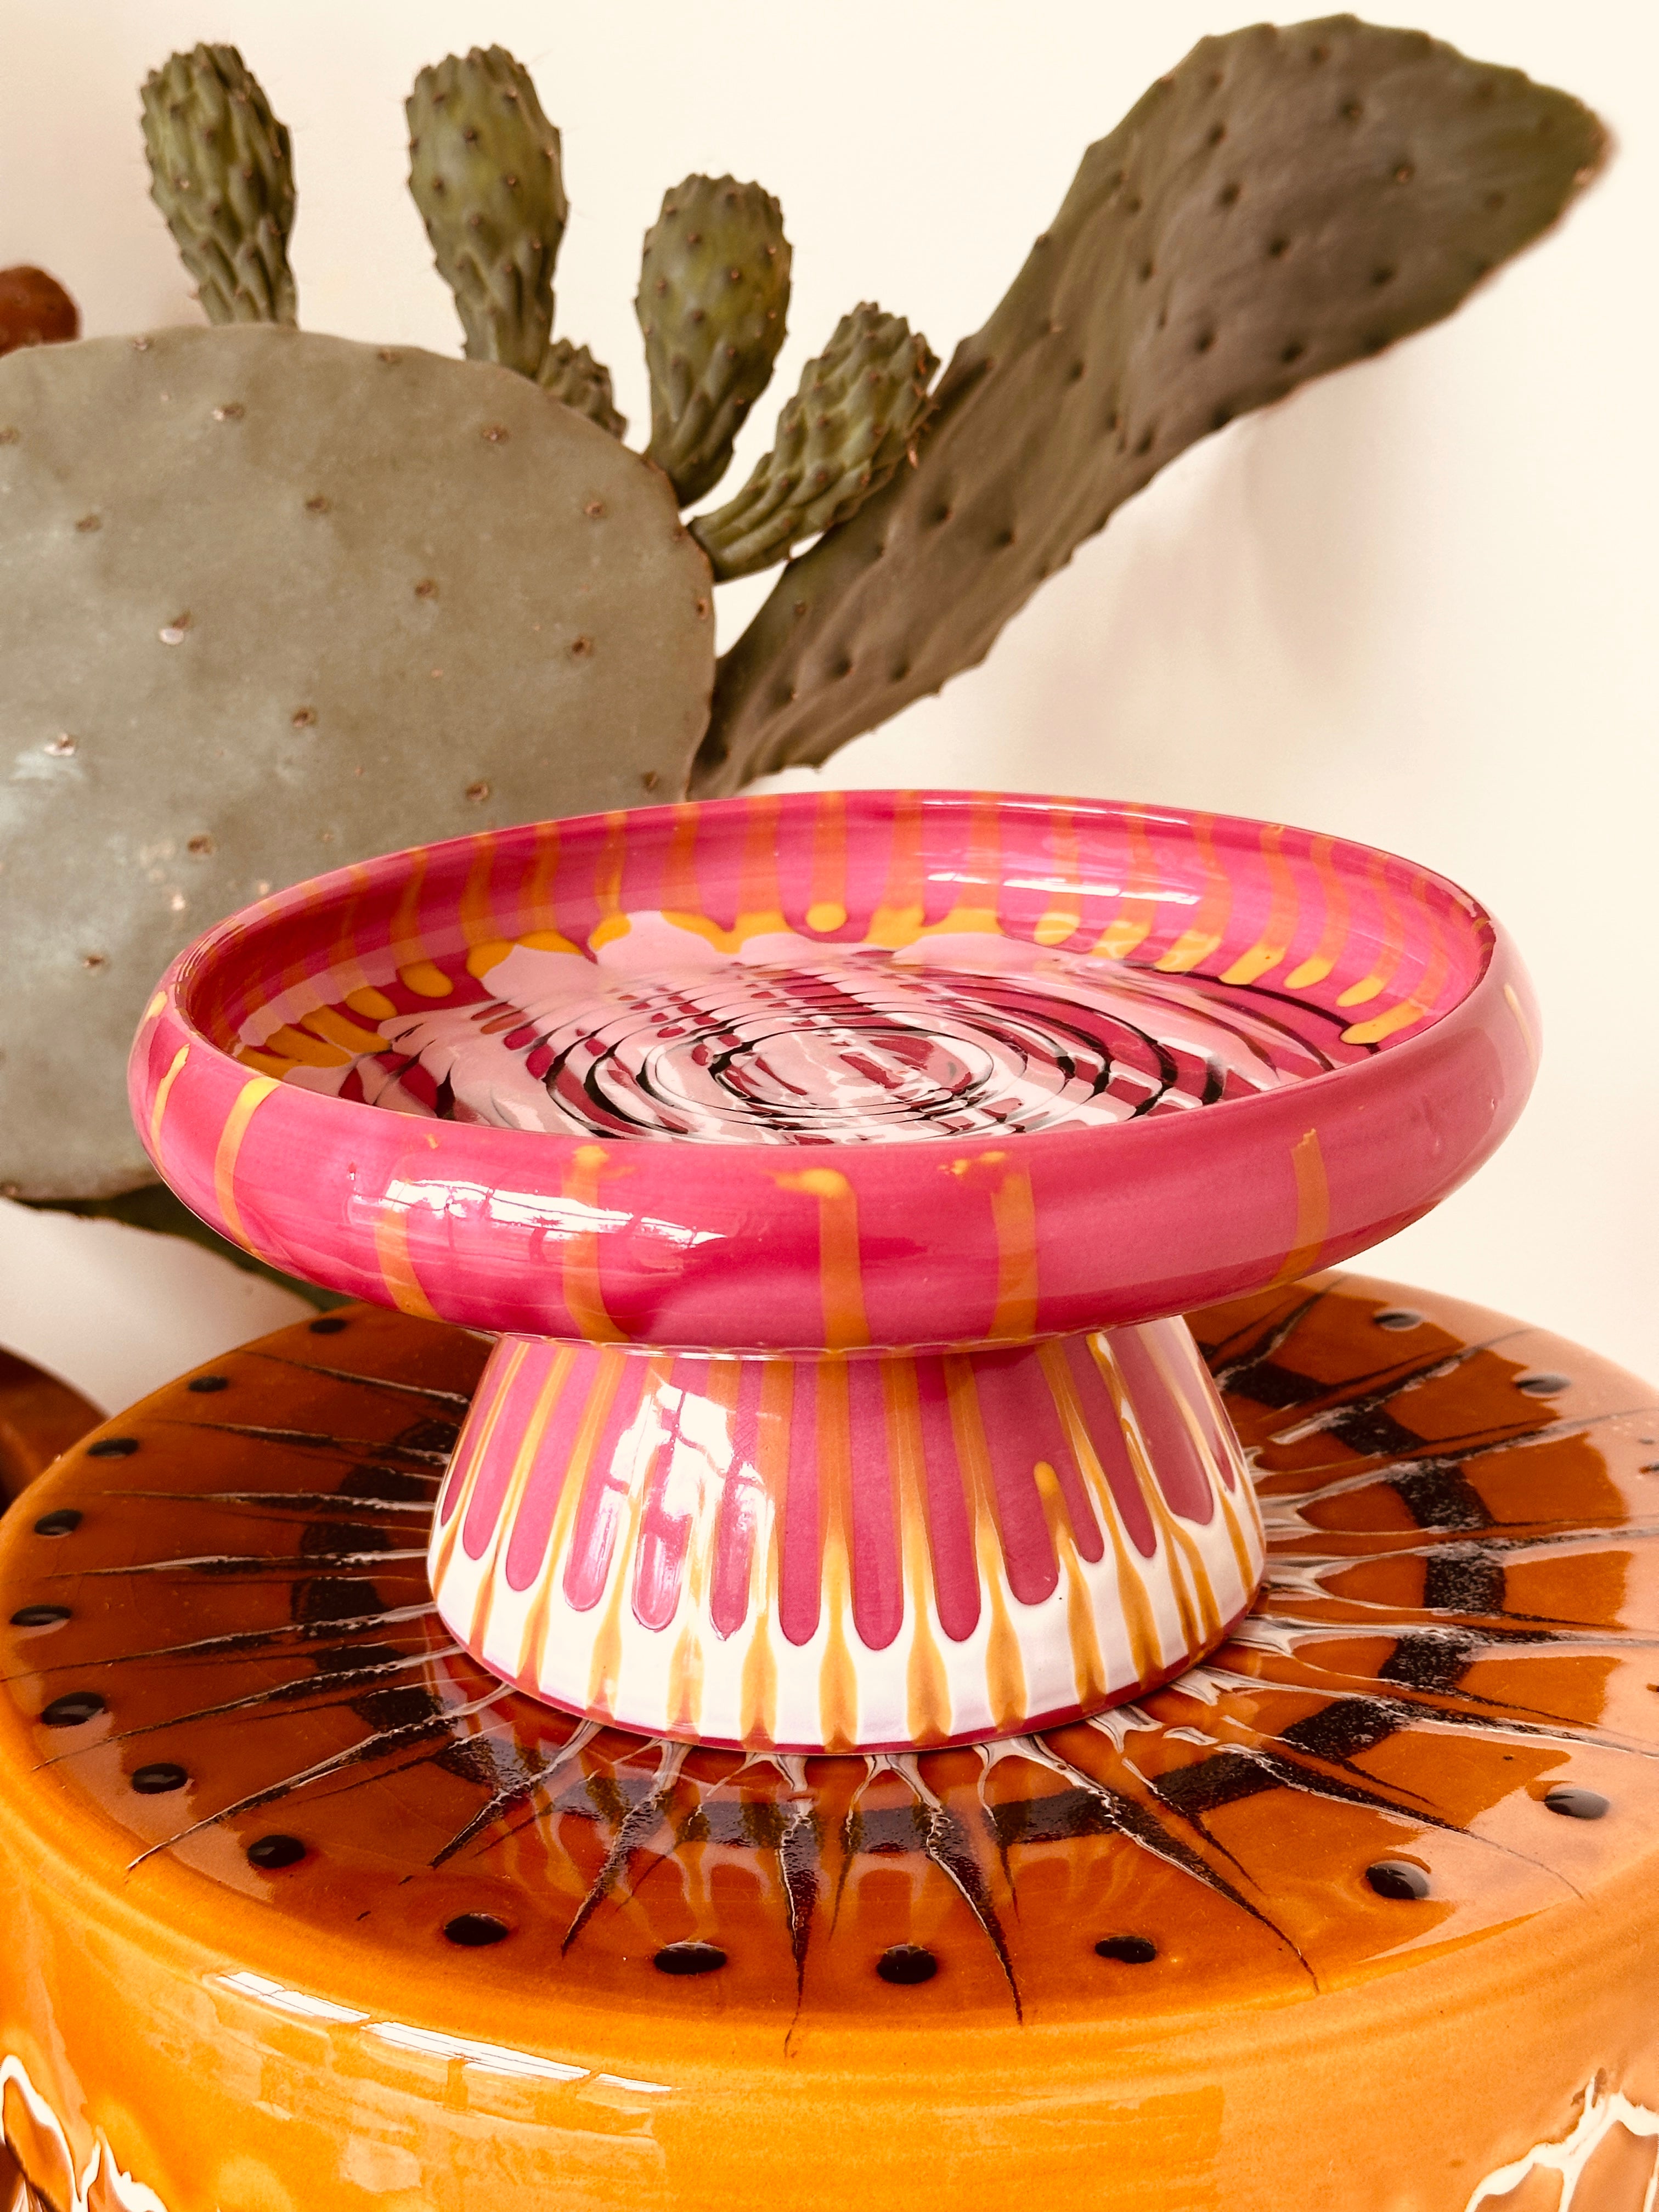 Psychodelic Frisbee High Plate "Riviera 1961 Fuxia“